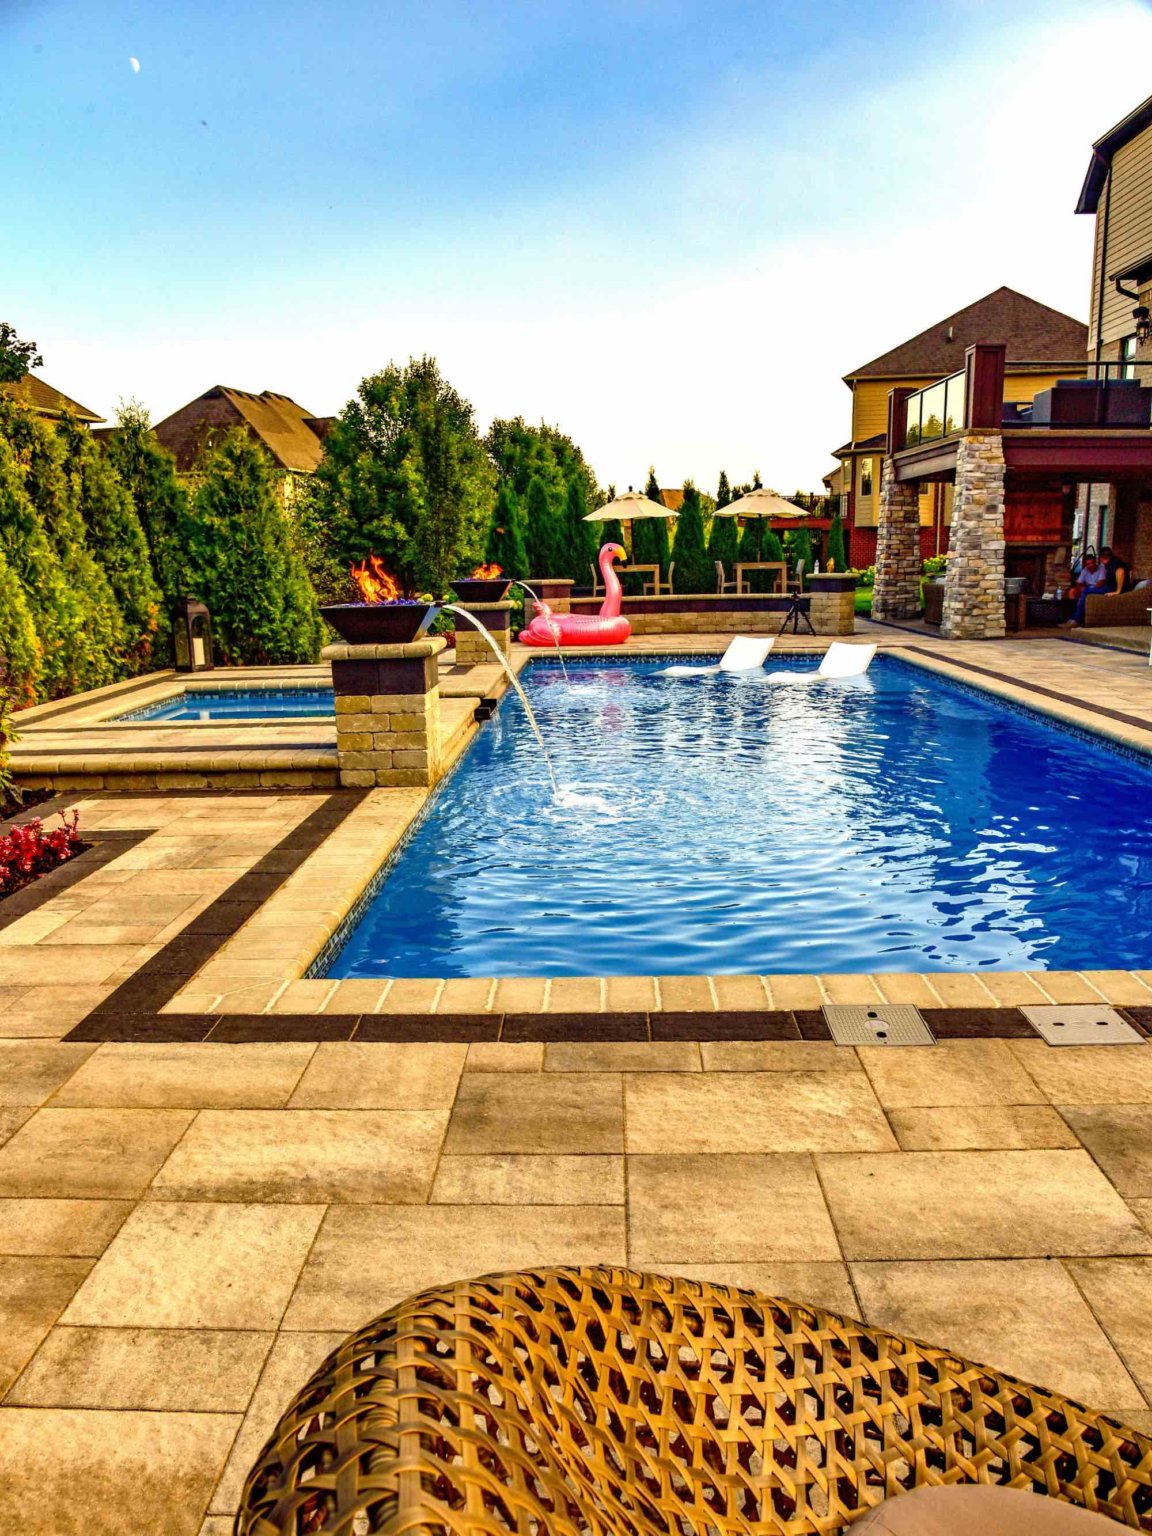 fiberglass pool designers in Shelby Twp, Mi landscape design project in Shelby Township cascade fiberglass swimming pool design with a raised spillover spa  Outdoor Fire Features Fire Pit Designs Fire Feature Ideas